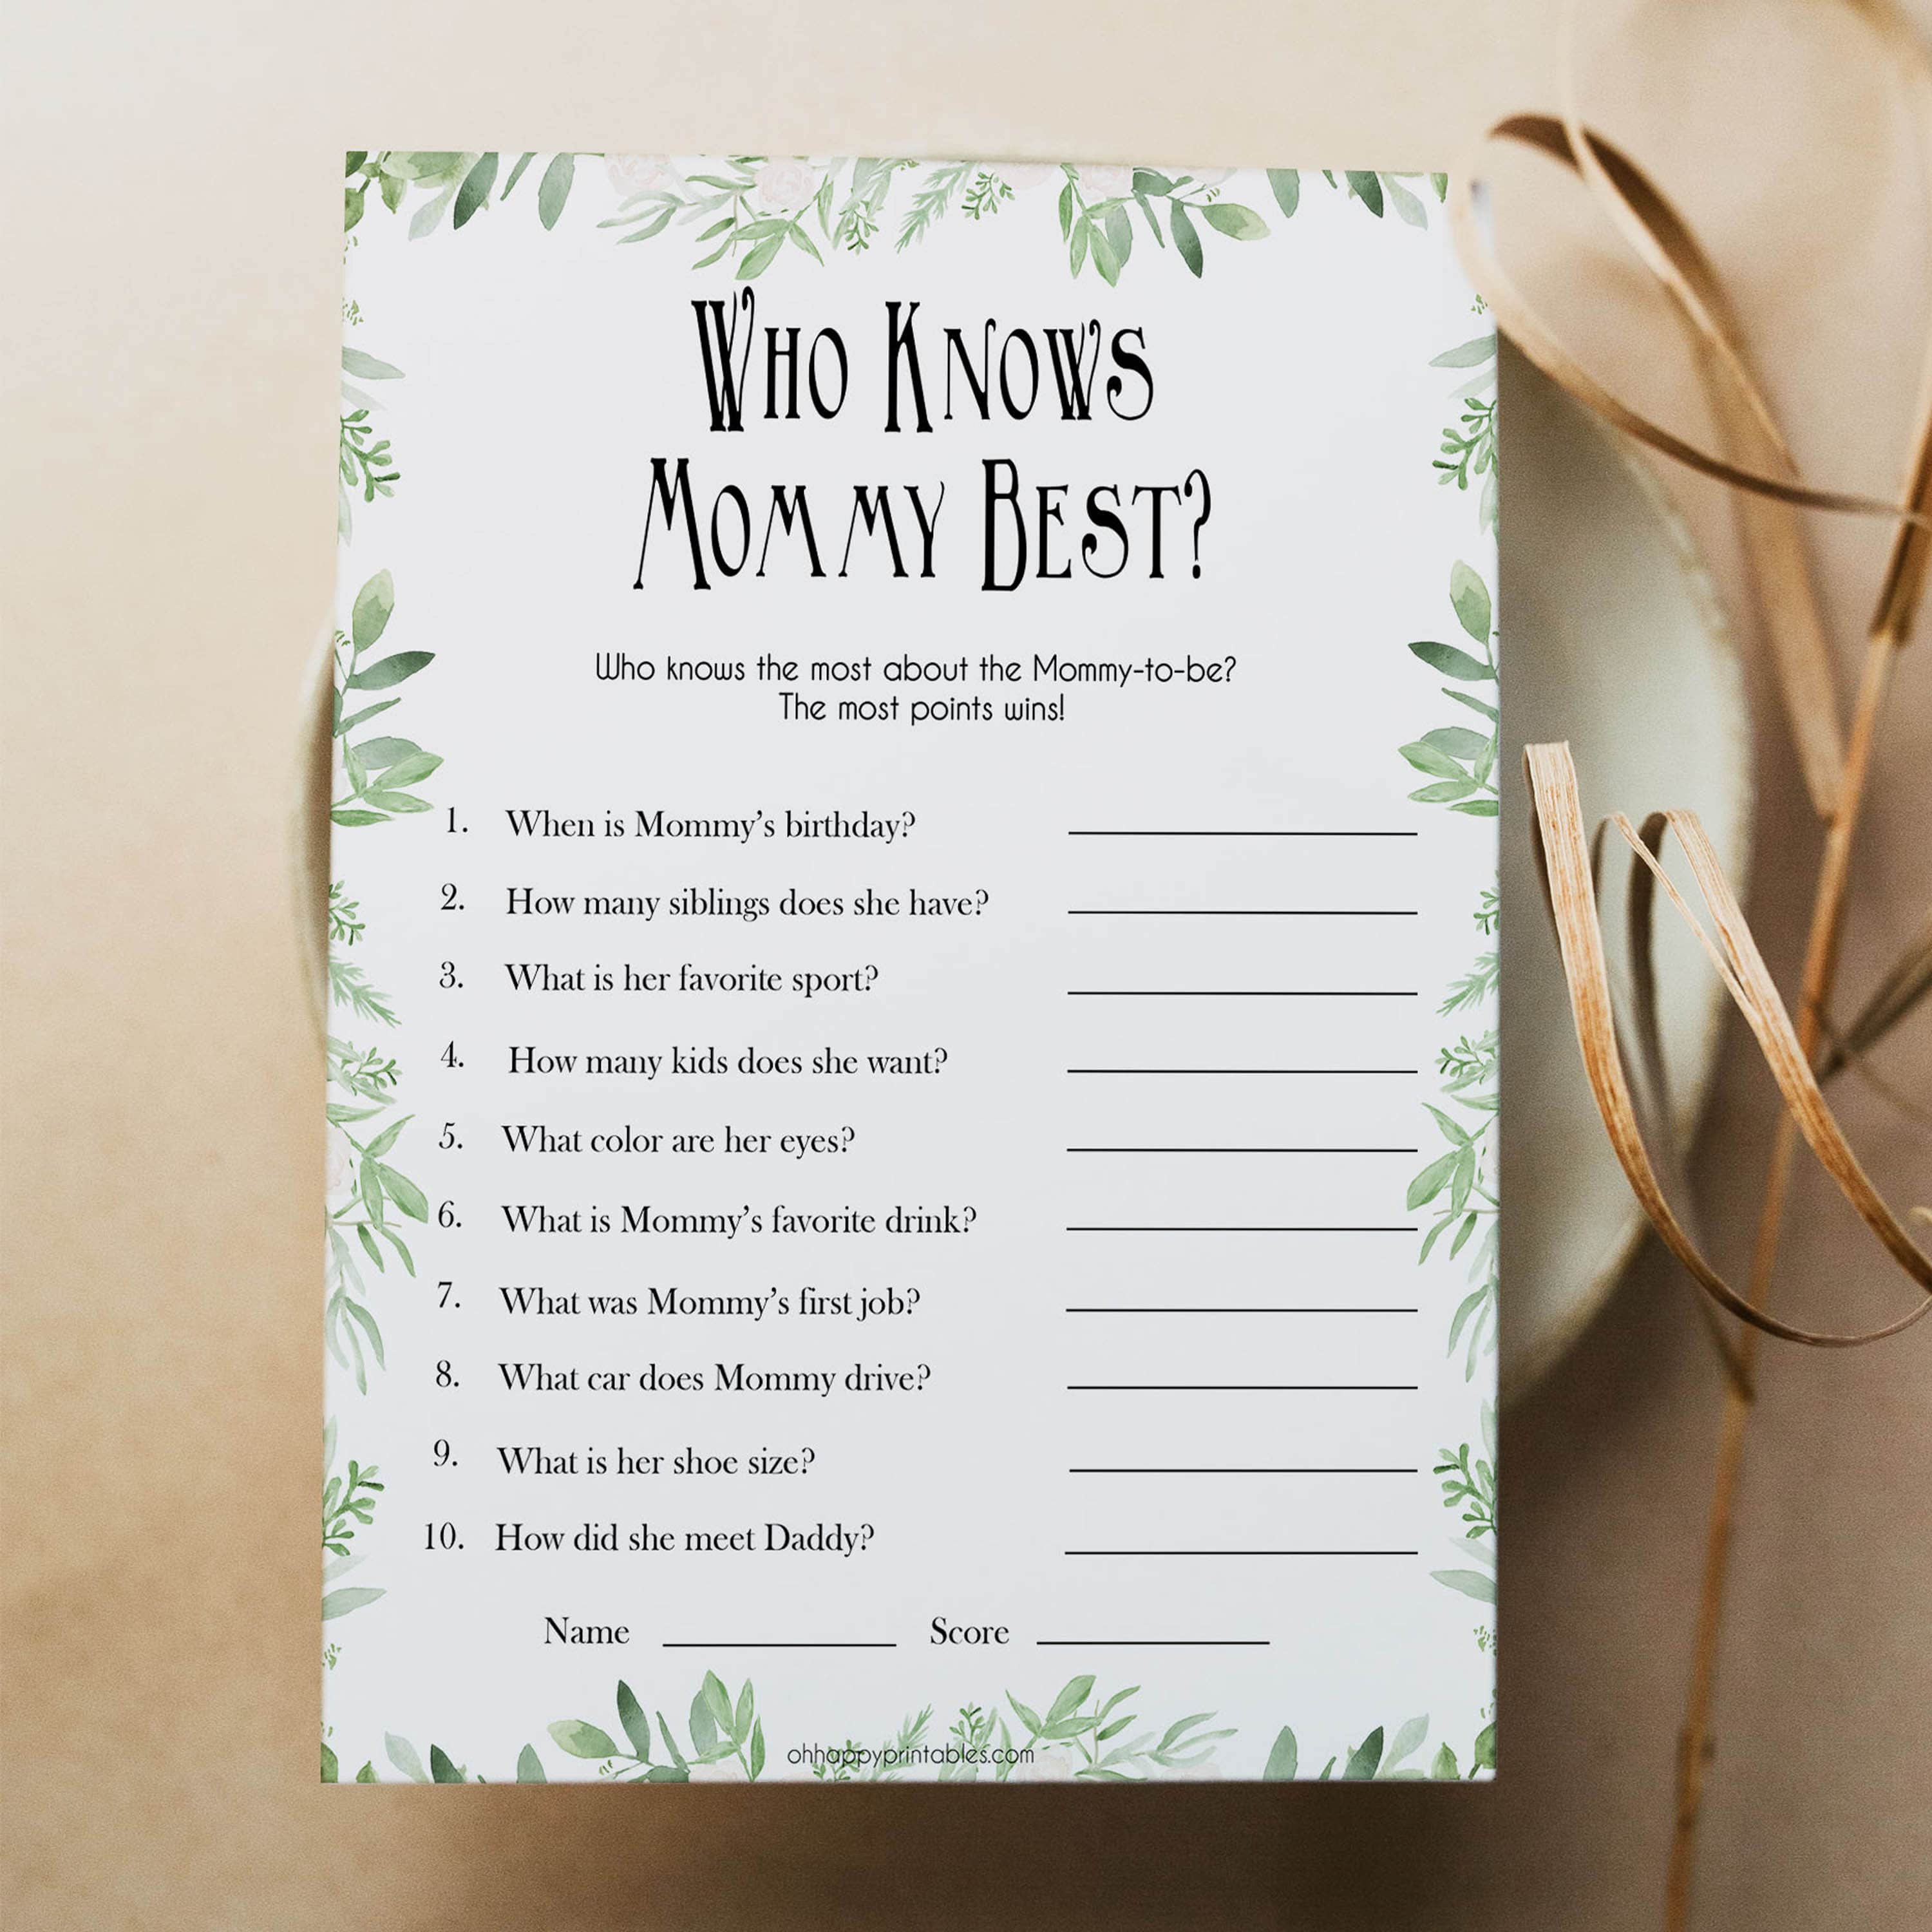 Greenery Who Knows Mommy Best Quiz, Baby Shower Games, Knows Mummy Games, Green Leaf Baby Shower Games, Green Fun Baby Shower Games, printable baby shower games, fun baby games, popular baby games